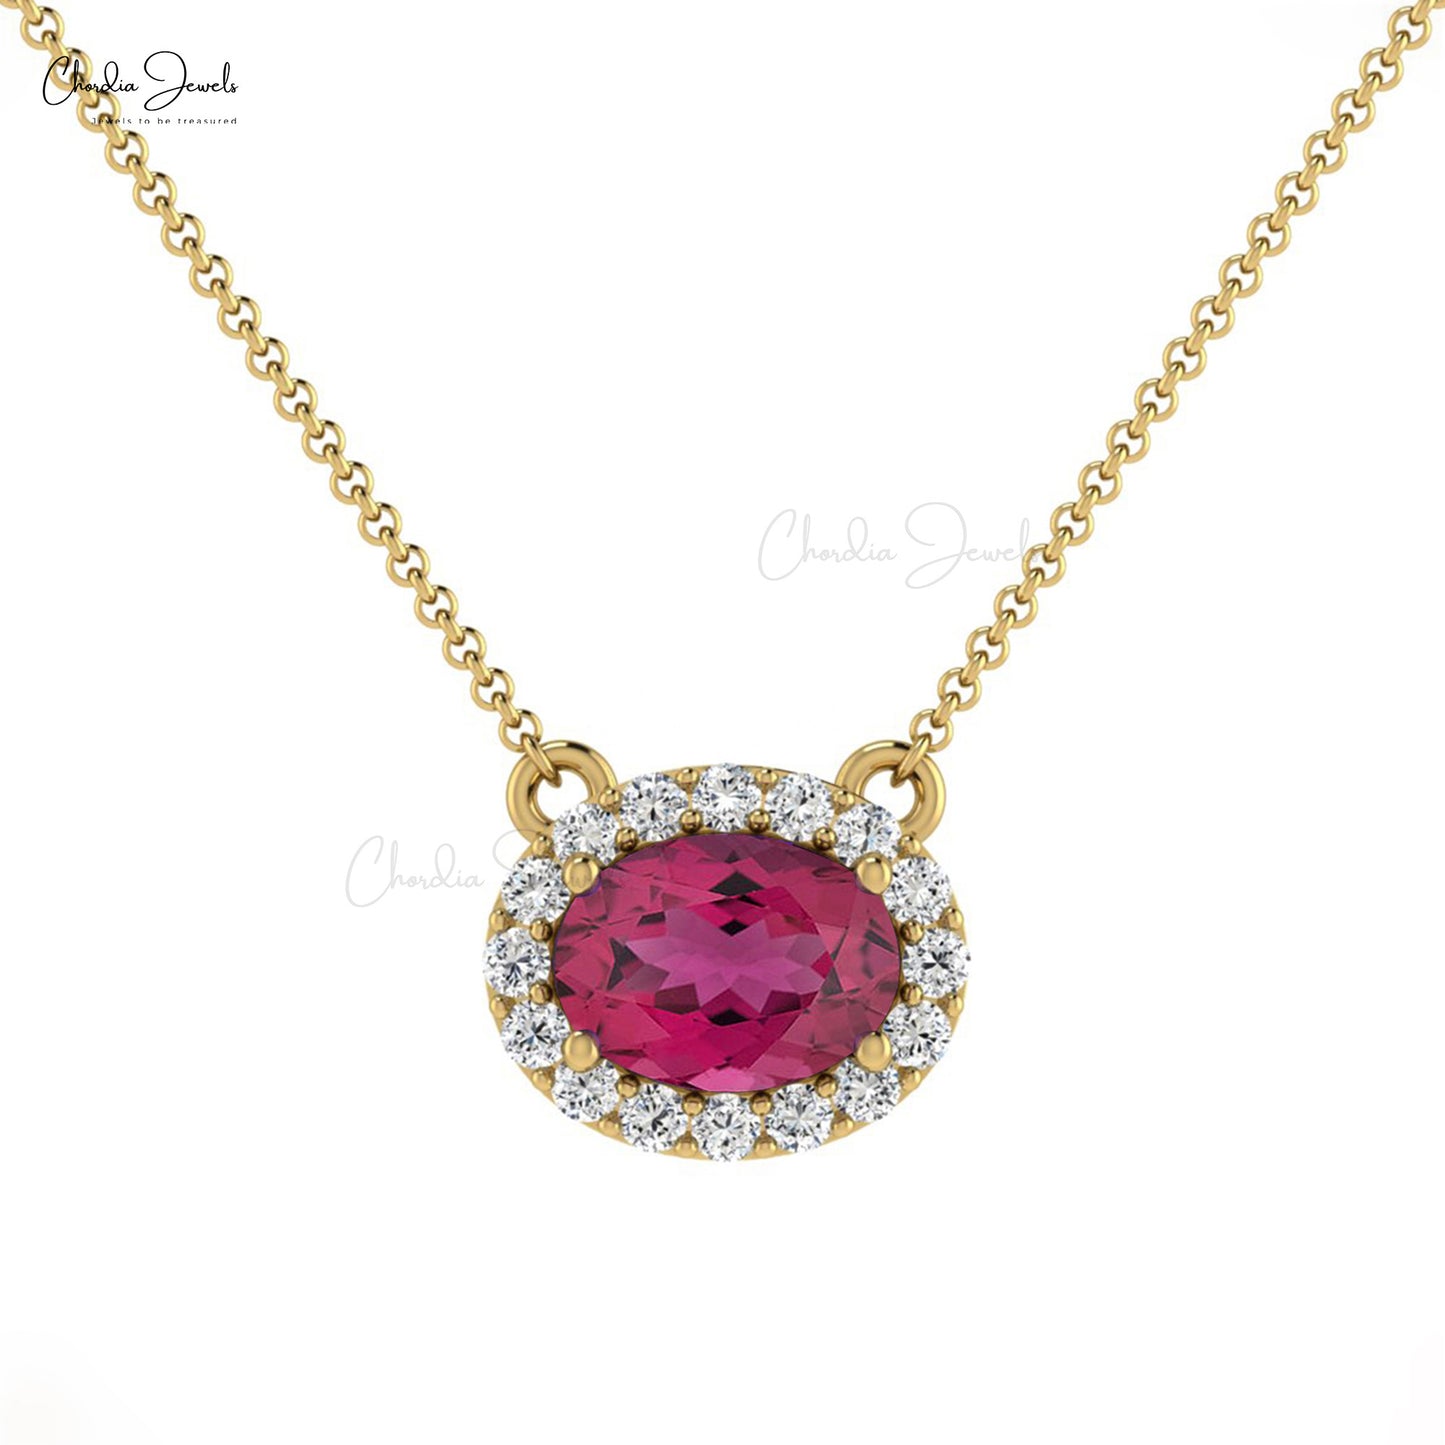 Load image into Gallery viewer, Diamond Halo Necklace with Oval Shaped Pink Tourmaline Stone
